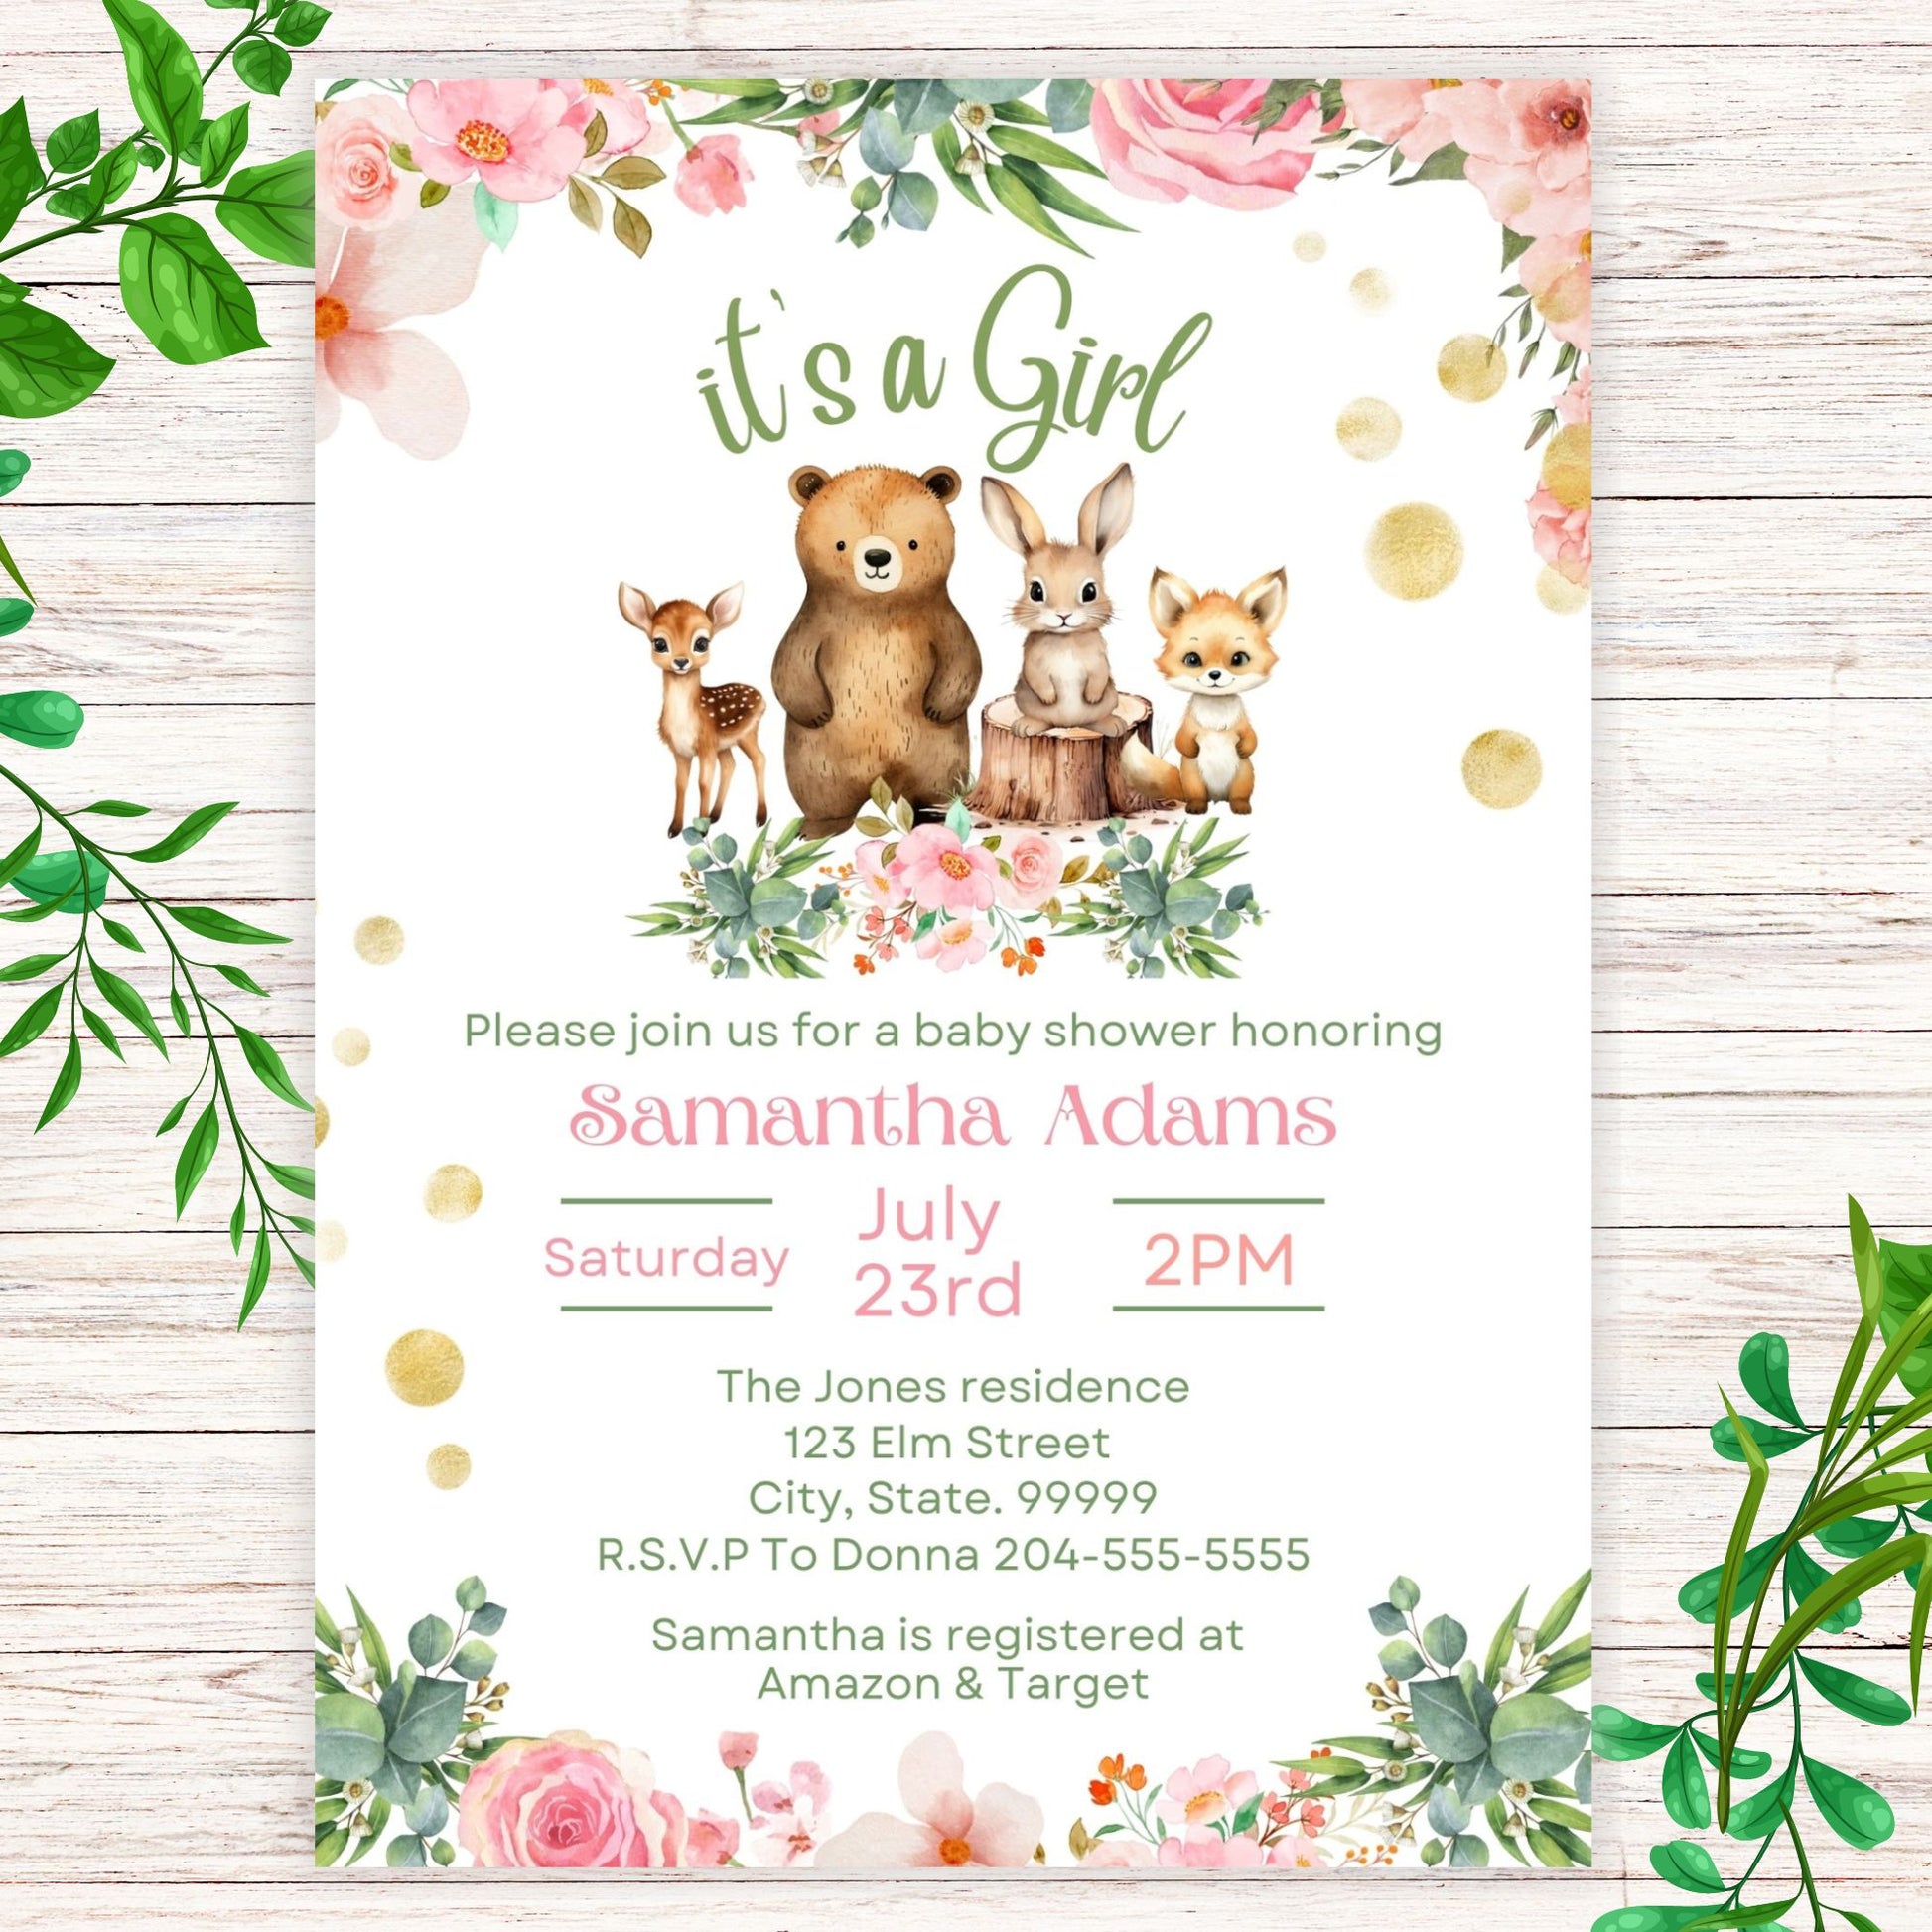 Woodland It's a Girl Baby Shower Invitation- Printable